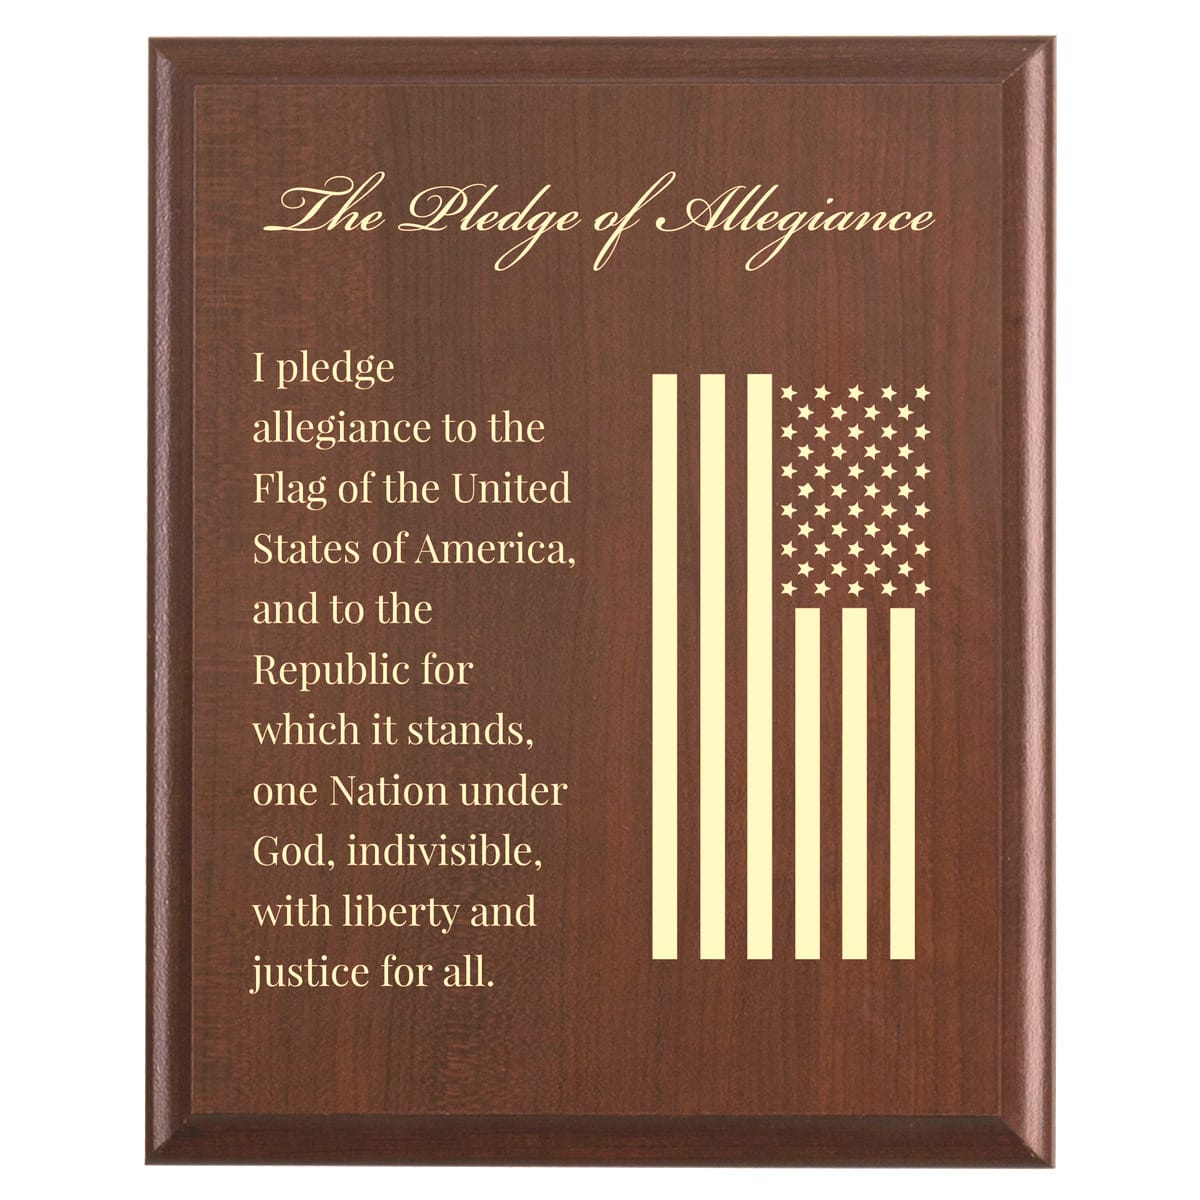 Plaque photo: The Pledge of Allegiance American Flag Plaque design with free personalization. Wood style finish with customized text.